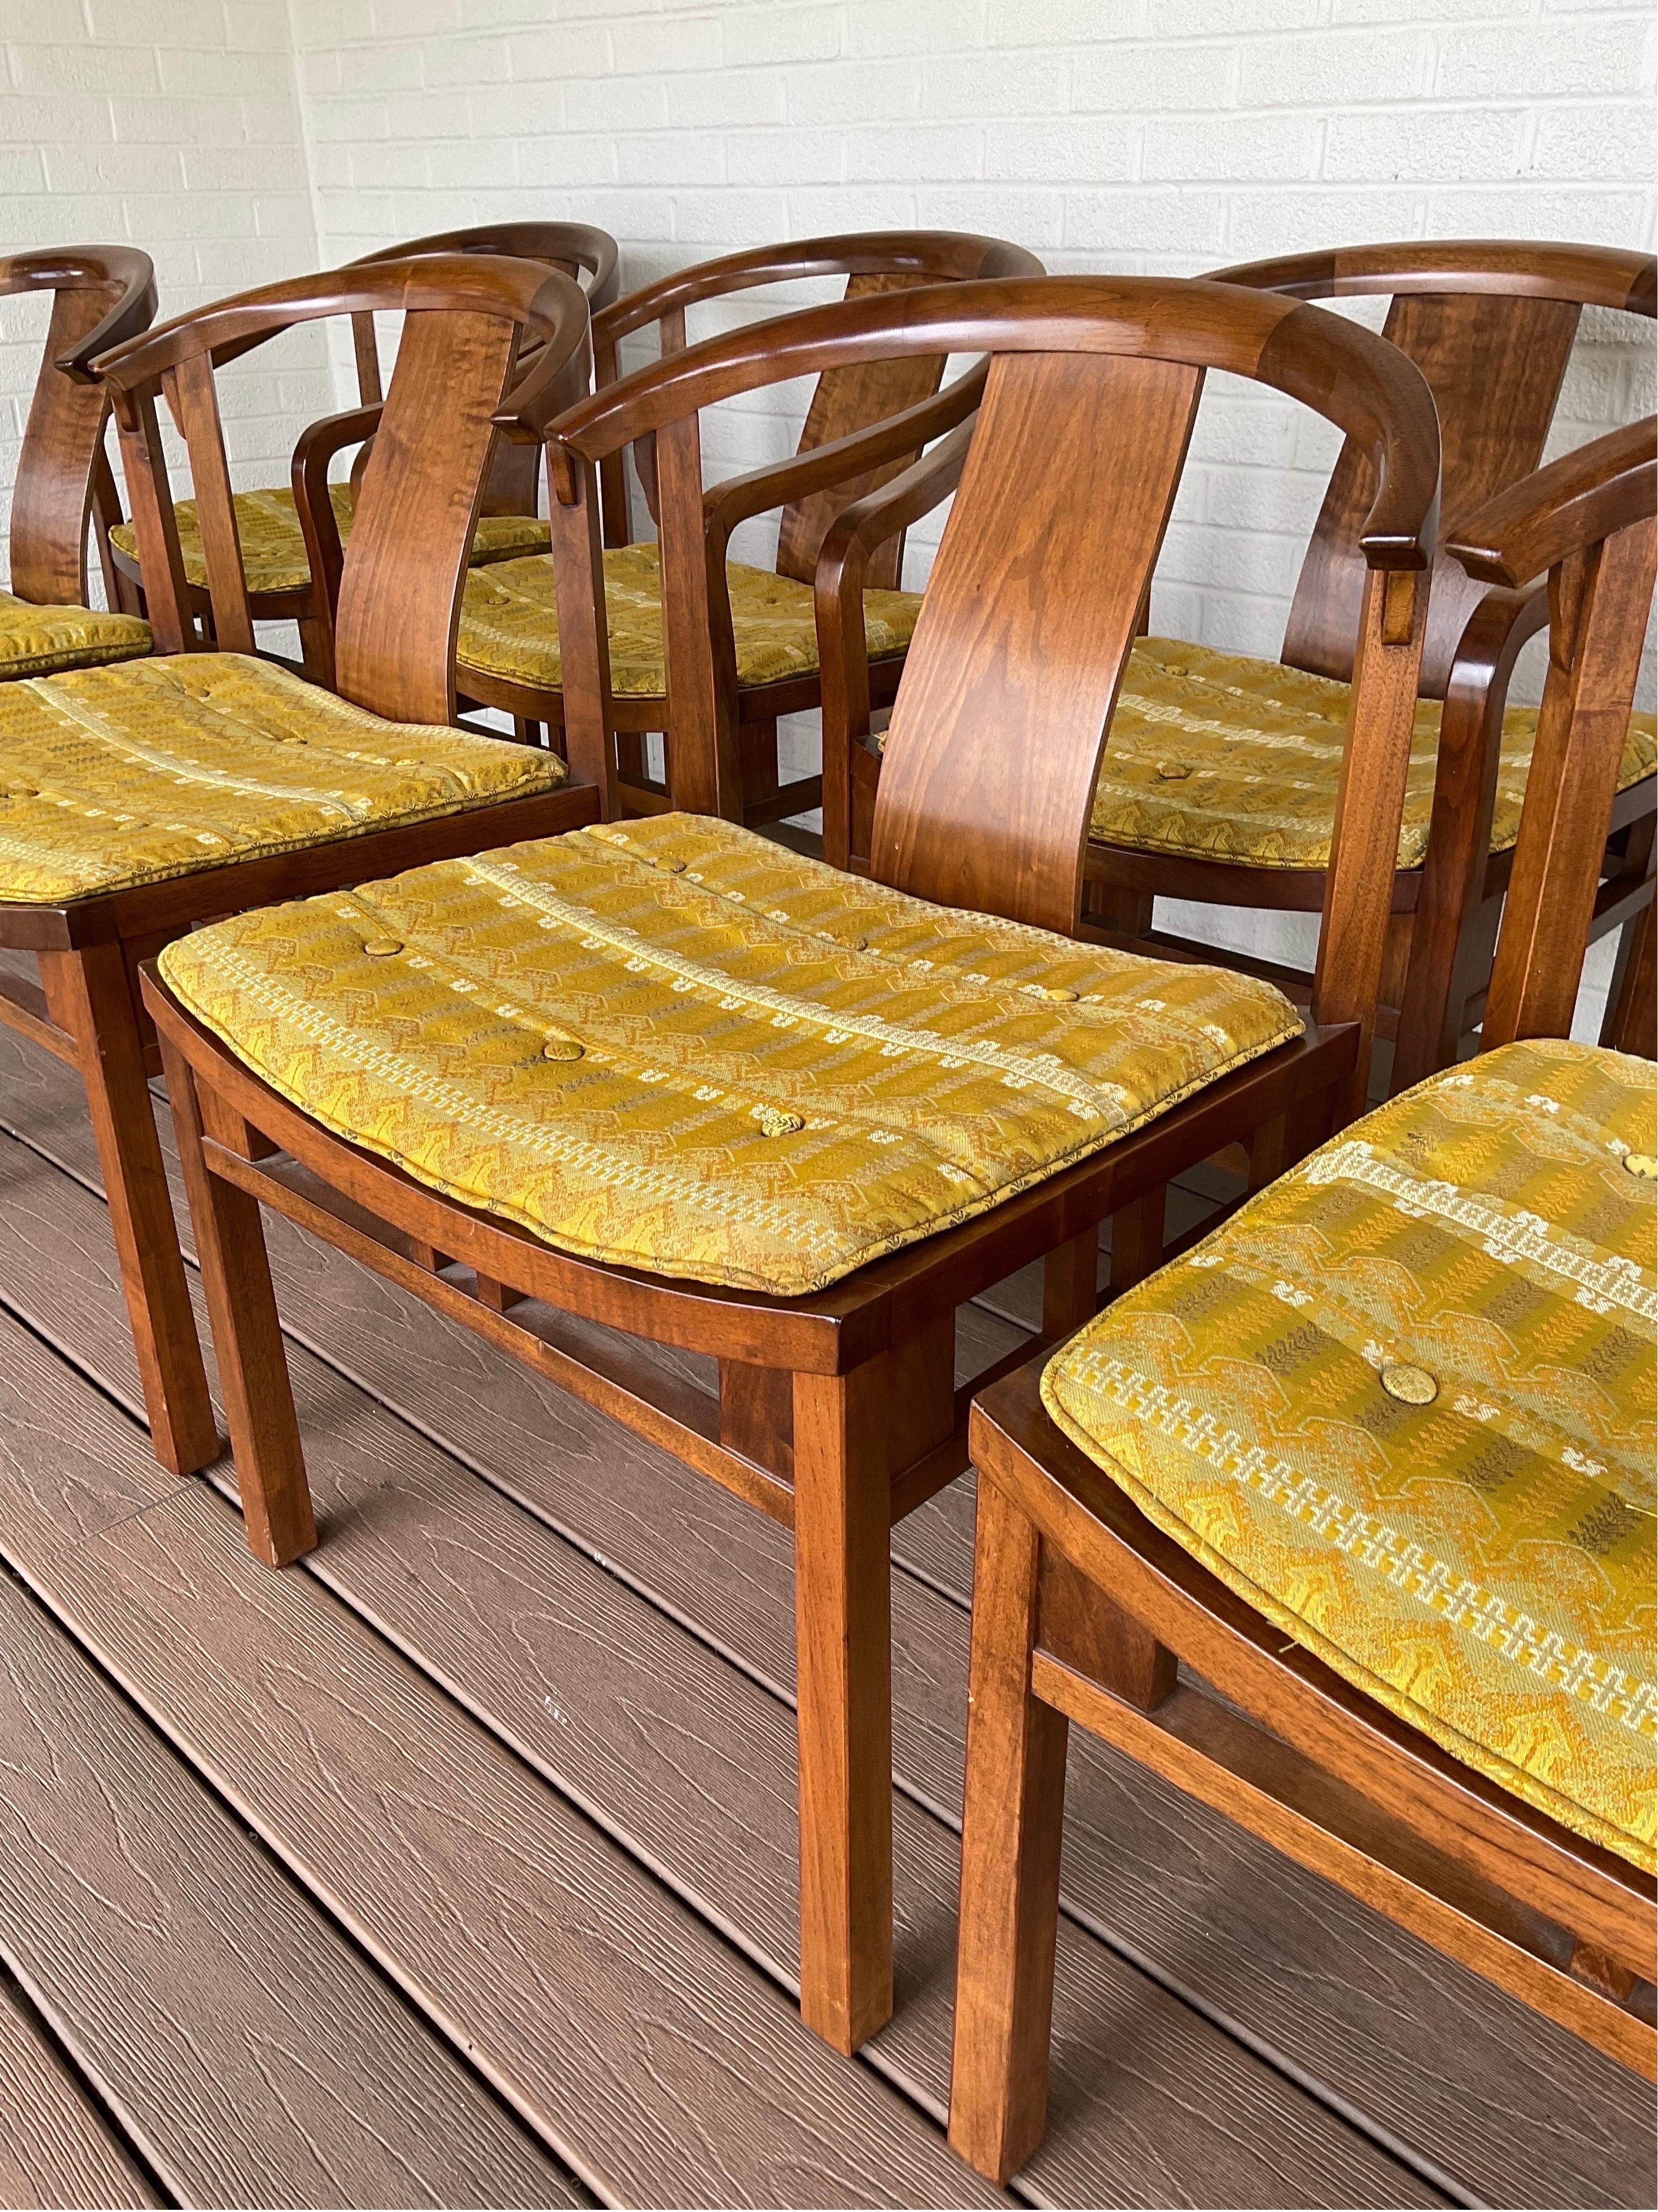 Hand-Crafted 1950s Walnut Dining Chairs by Michael Taylor for Baker Furniture - Set of 10 For Sale